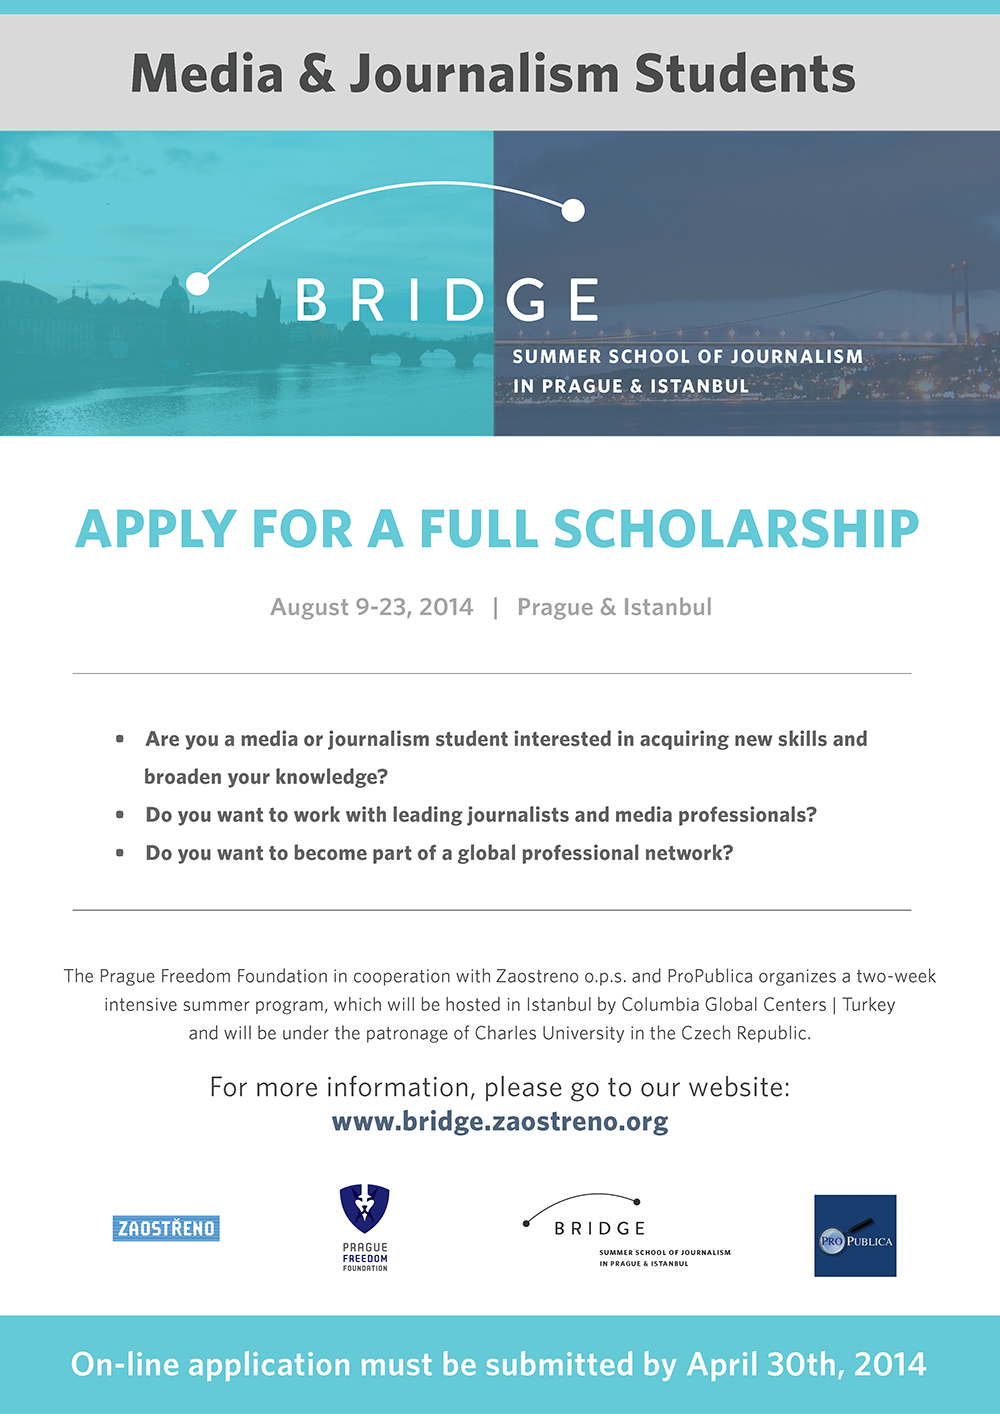 Apply Now for Scholarships to Study Journalism in Istanbul and Prague